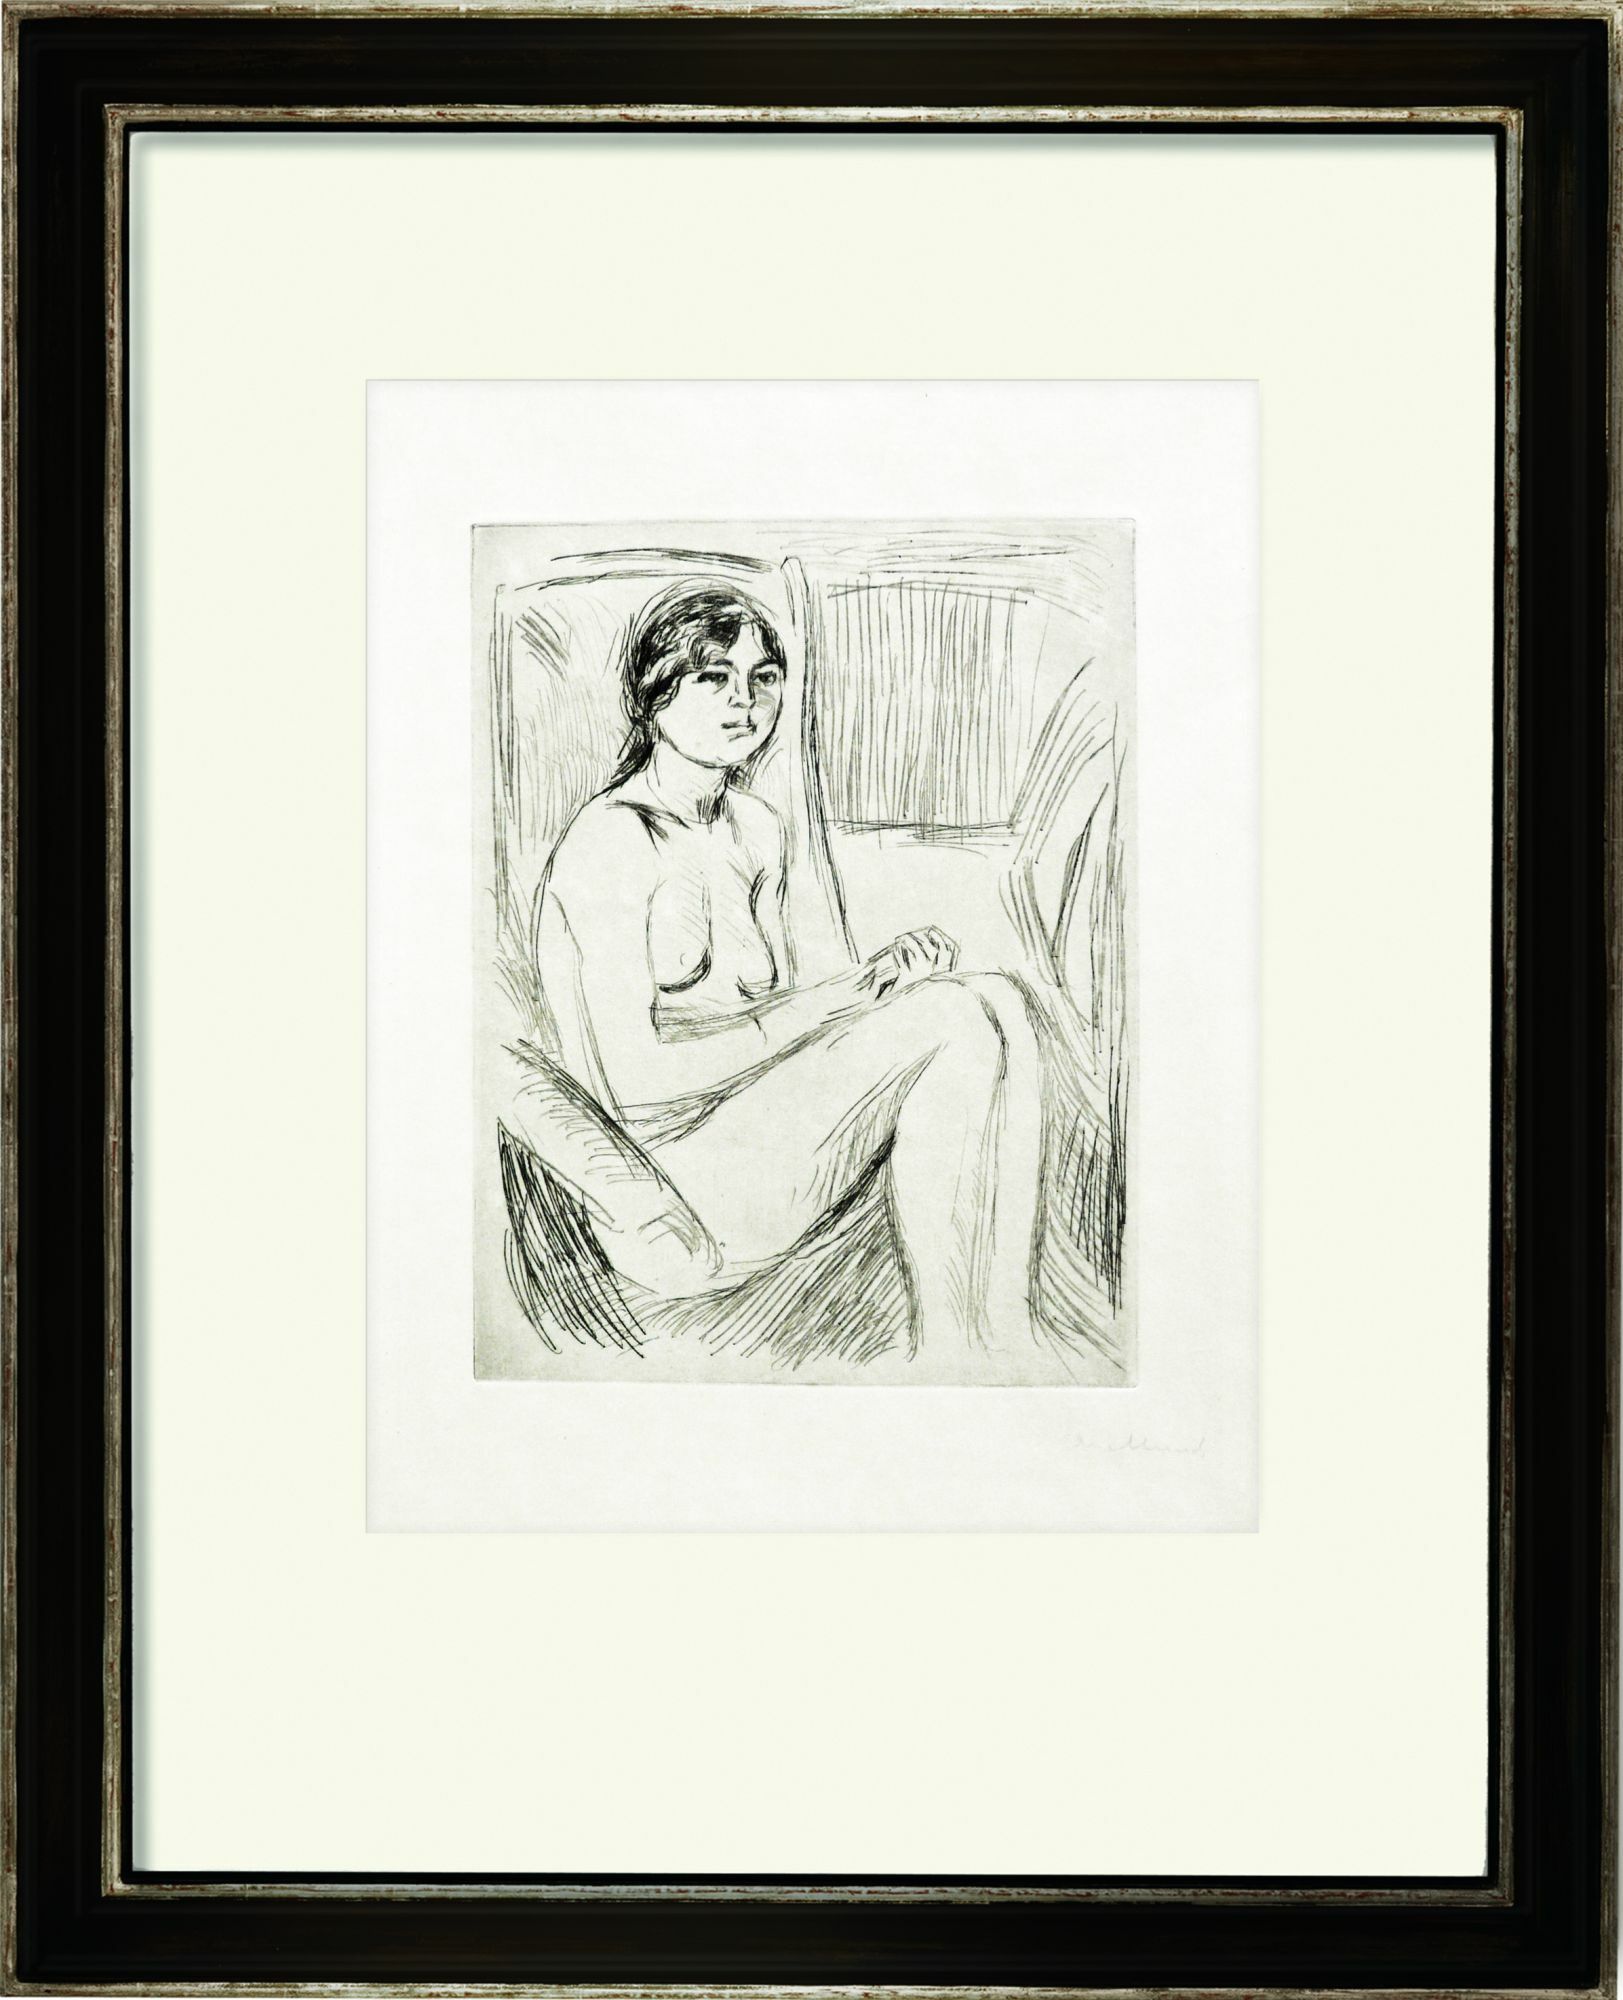 Picture "Celline Nude" (1912) by Edvard Munch